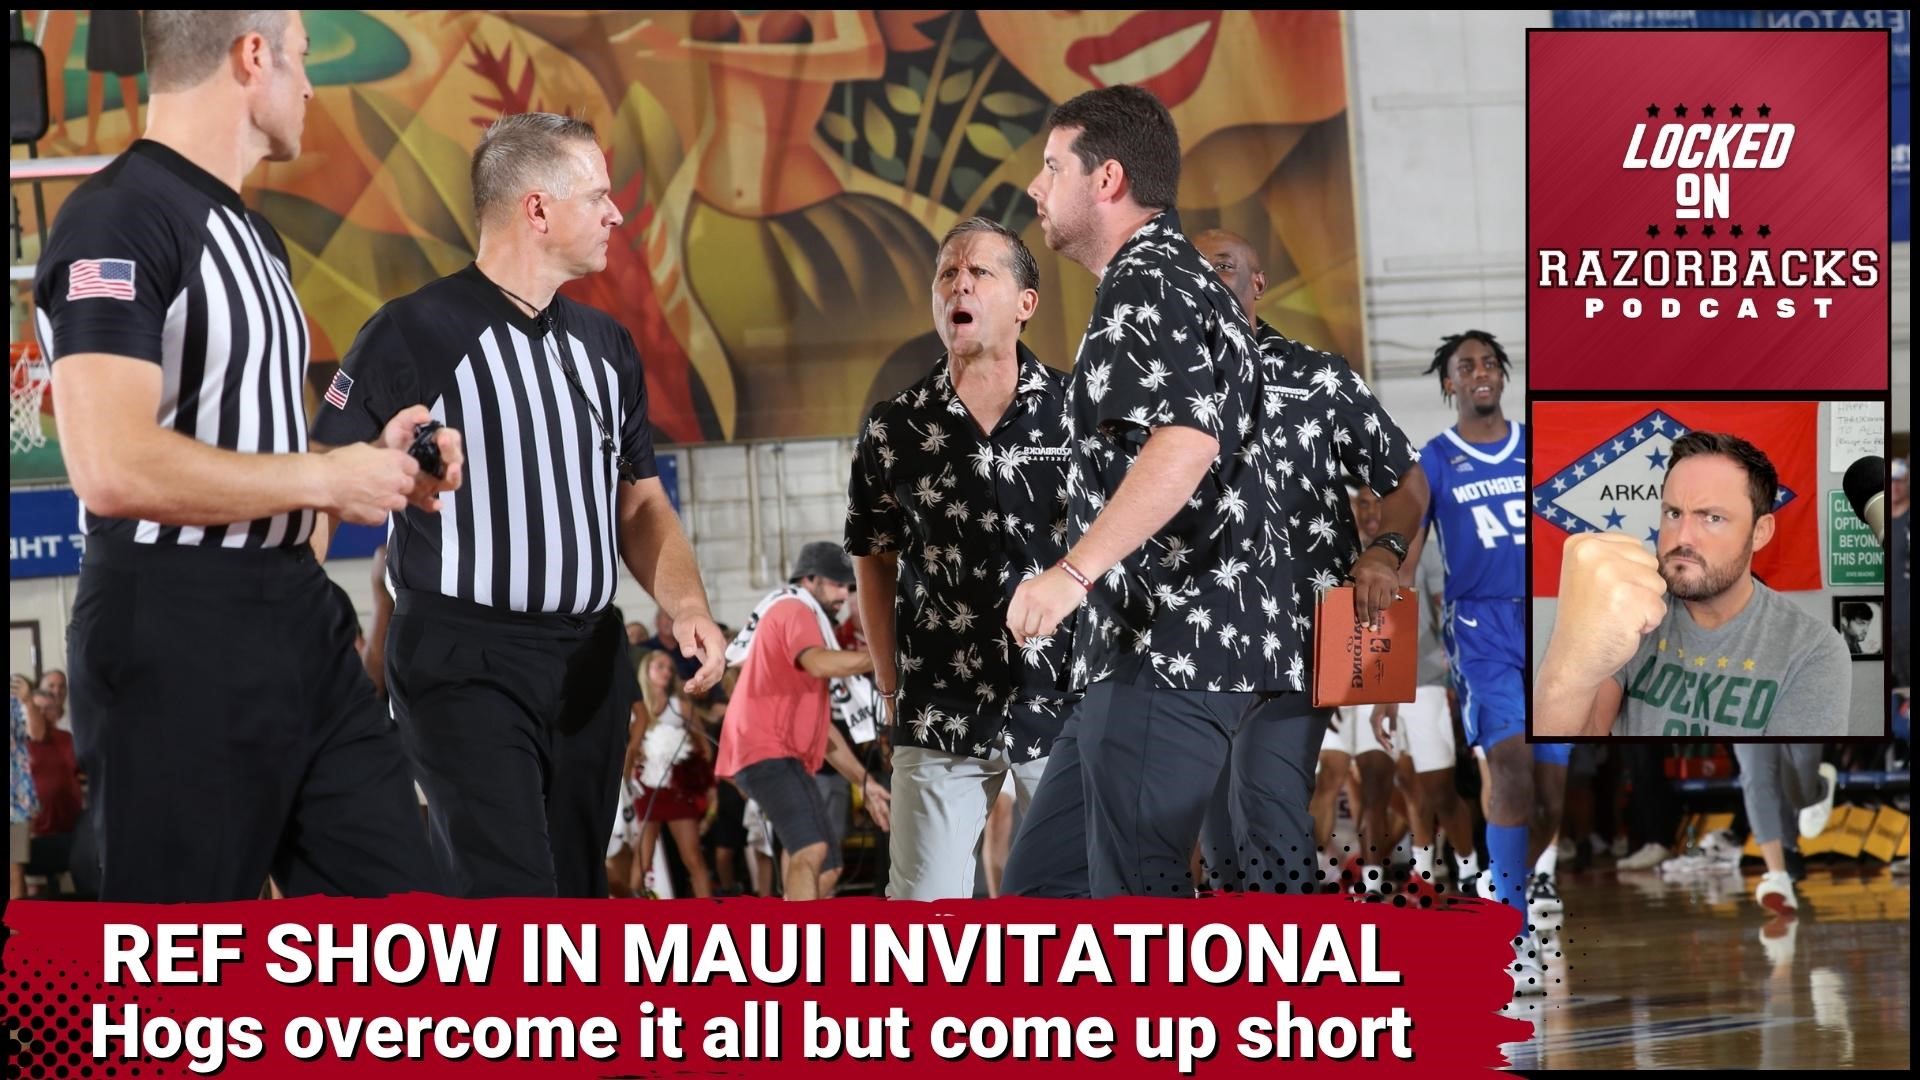 John Nabors reacts to the Razorbacks loss to Creighton in the Maui Invitational last night and how the officiating was extremely costly in the 2nd half for the Hogs.